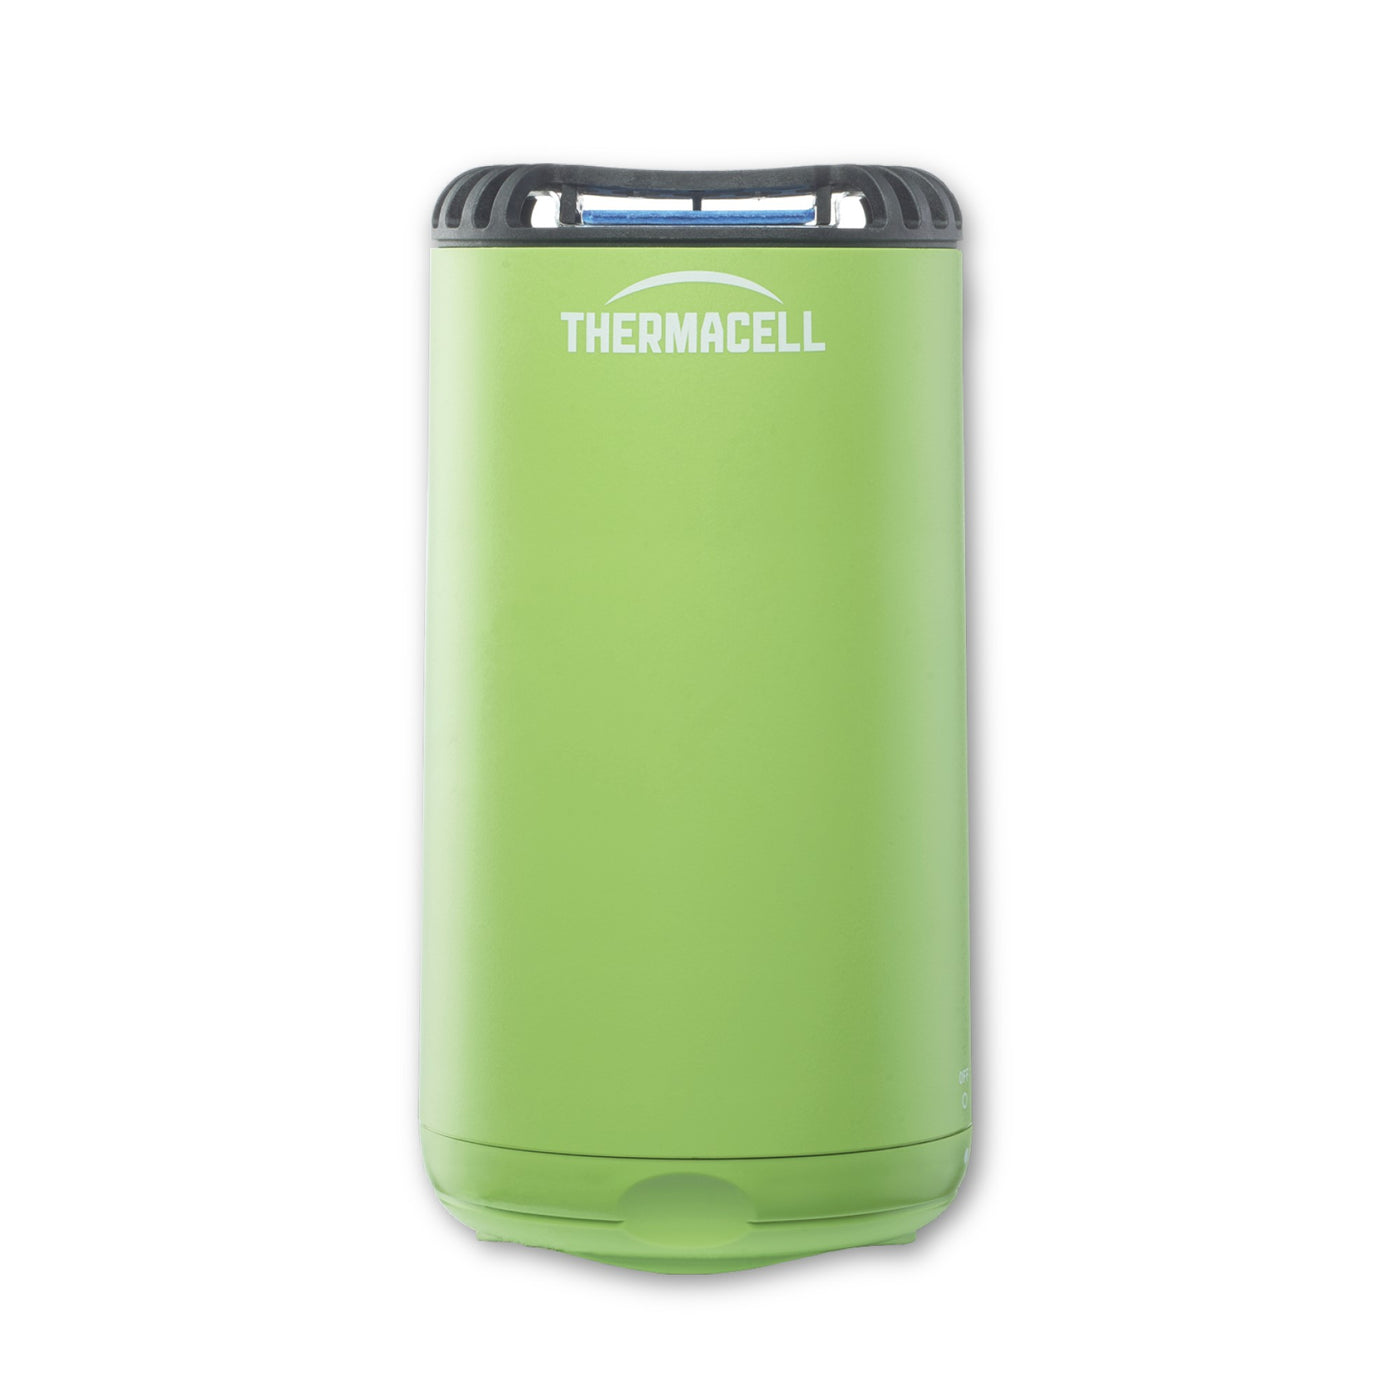 THERMACELL "Patio Shield" Mosquito Repellent